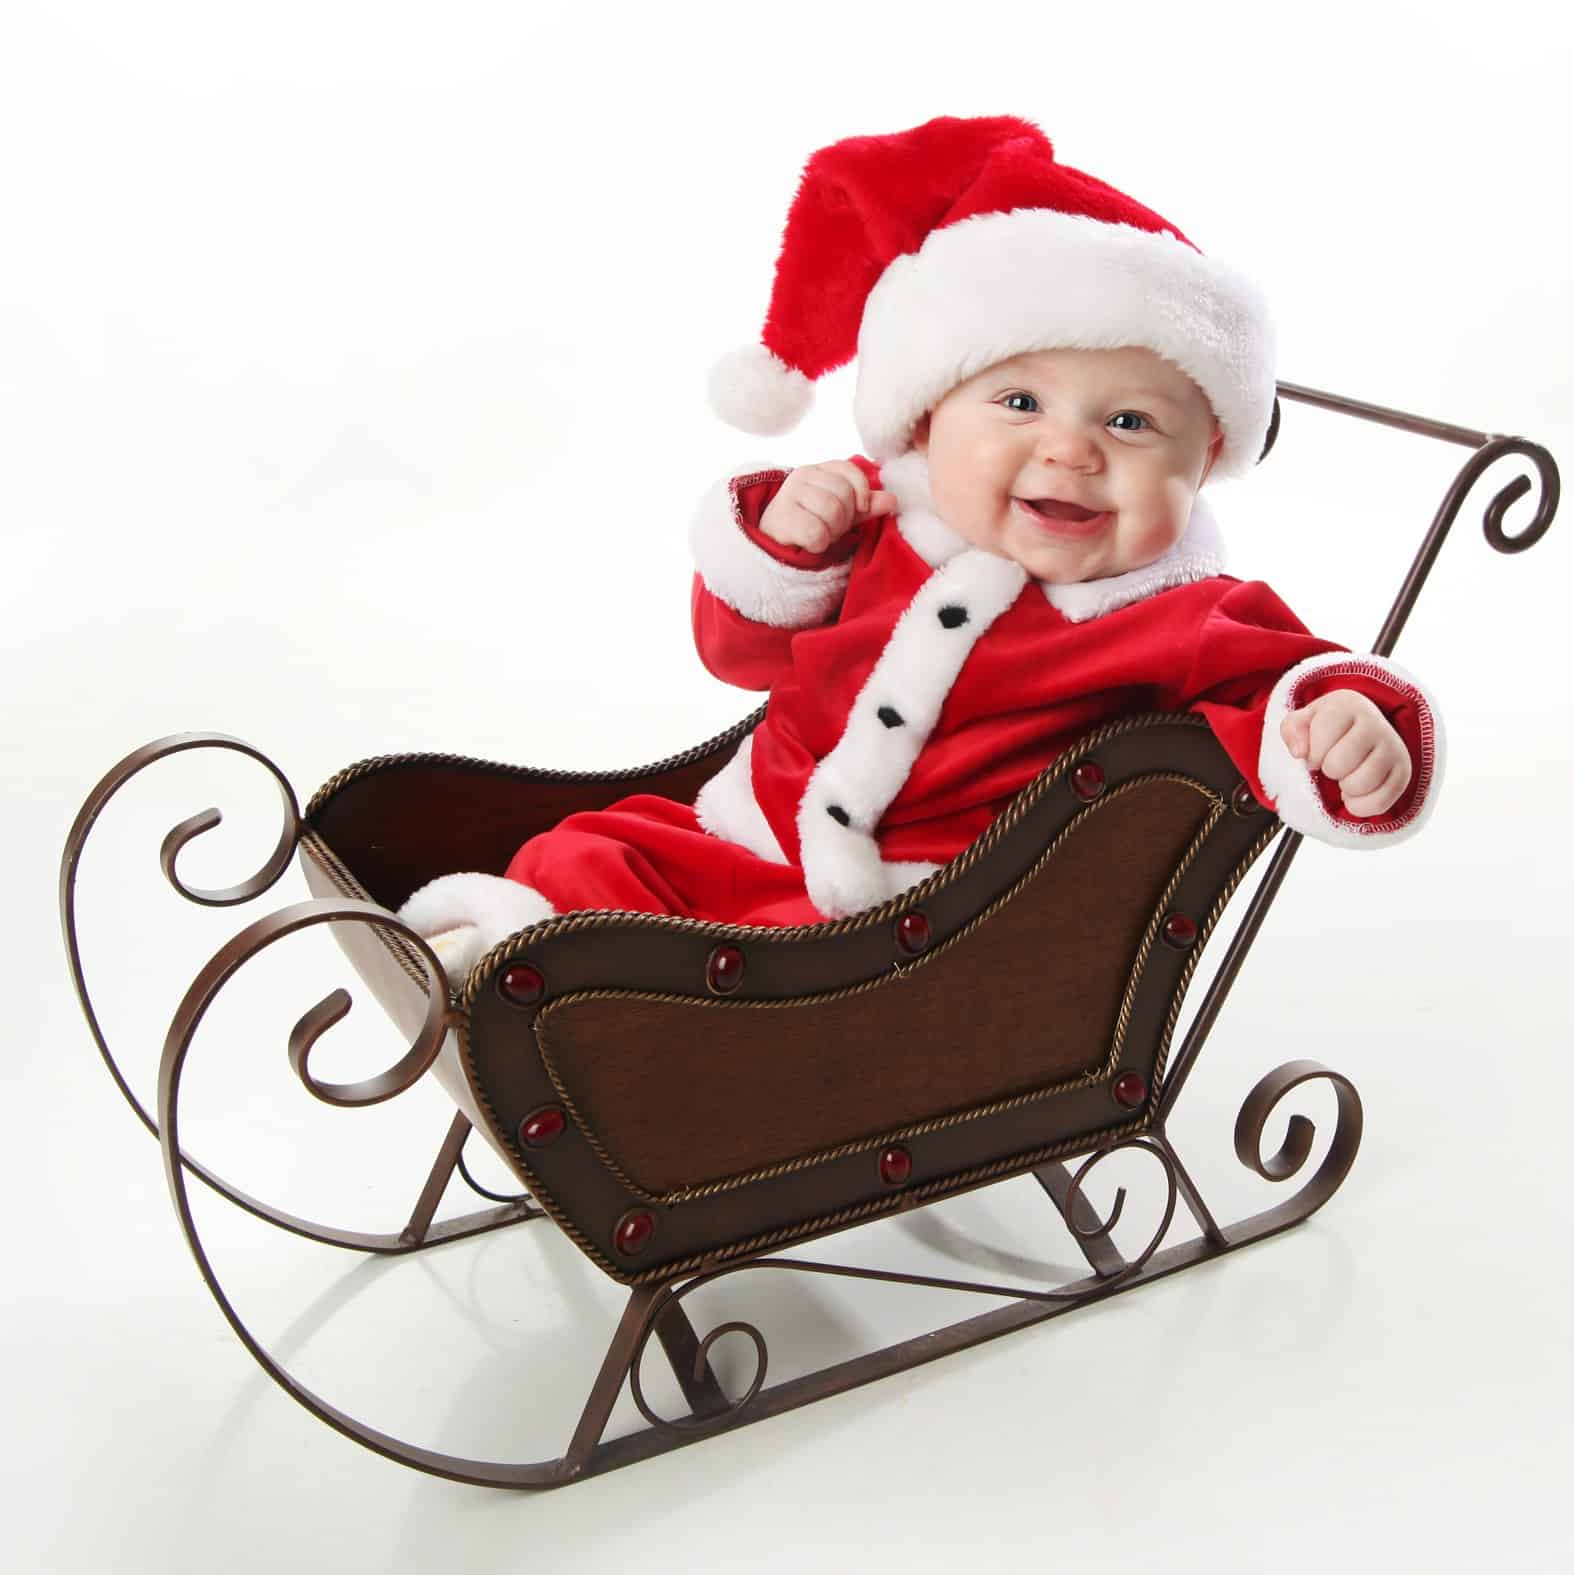 Adorable young baby wearing a santa claus suit and hat sitting in a metal Christmas snow sleigh